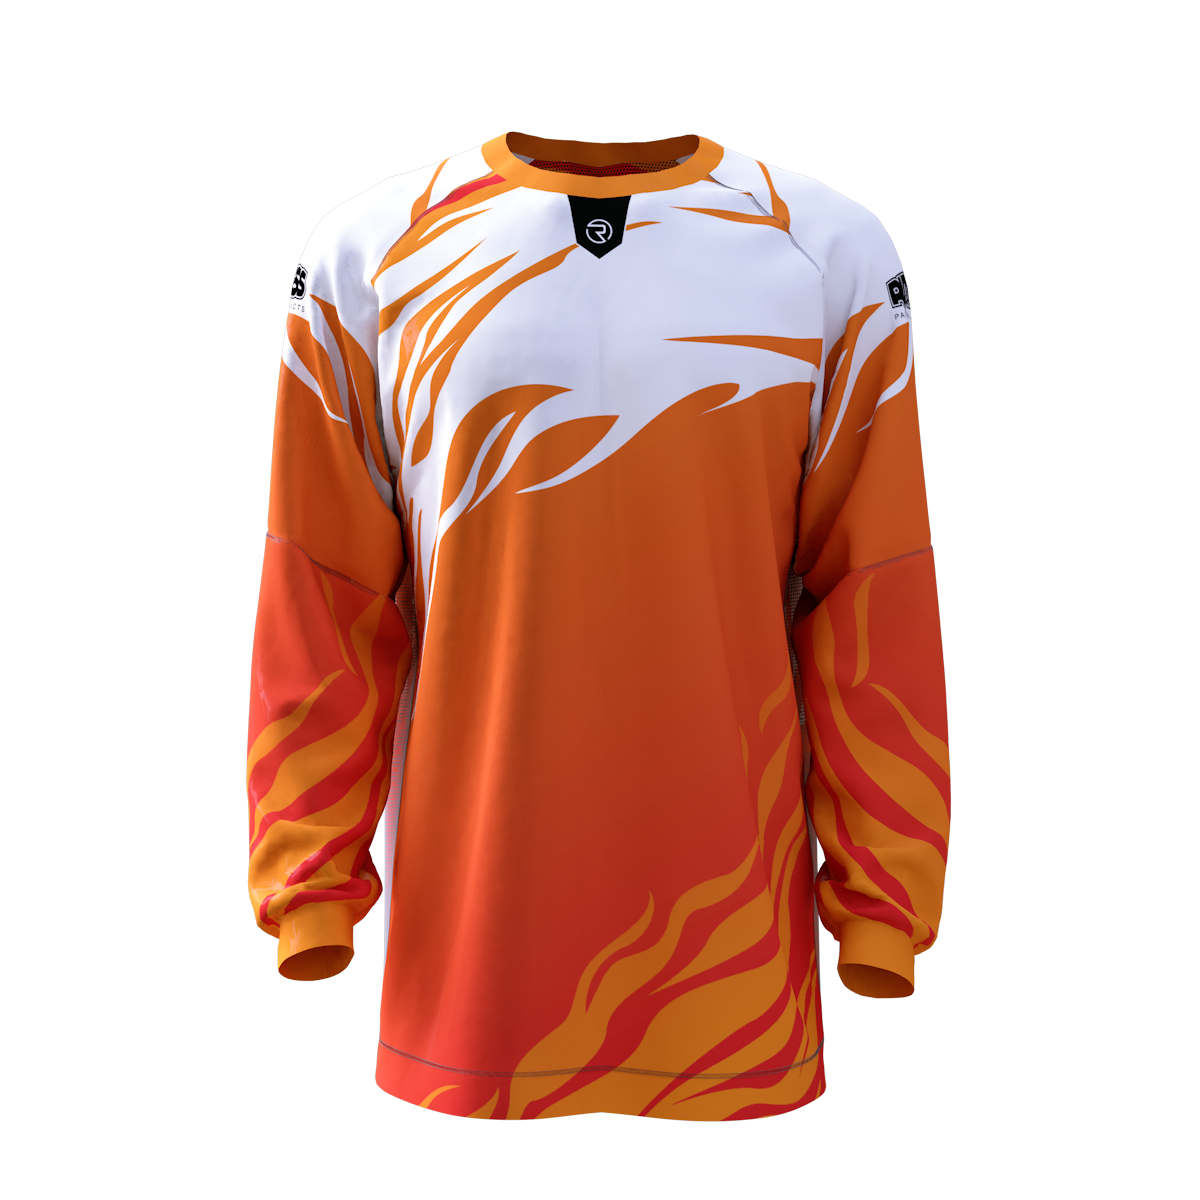 Fire Breeze Jersey - Ruthless Paintball Products